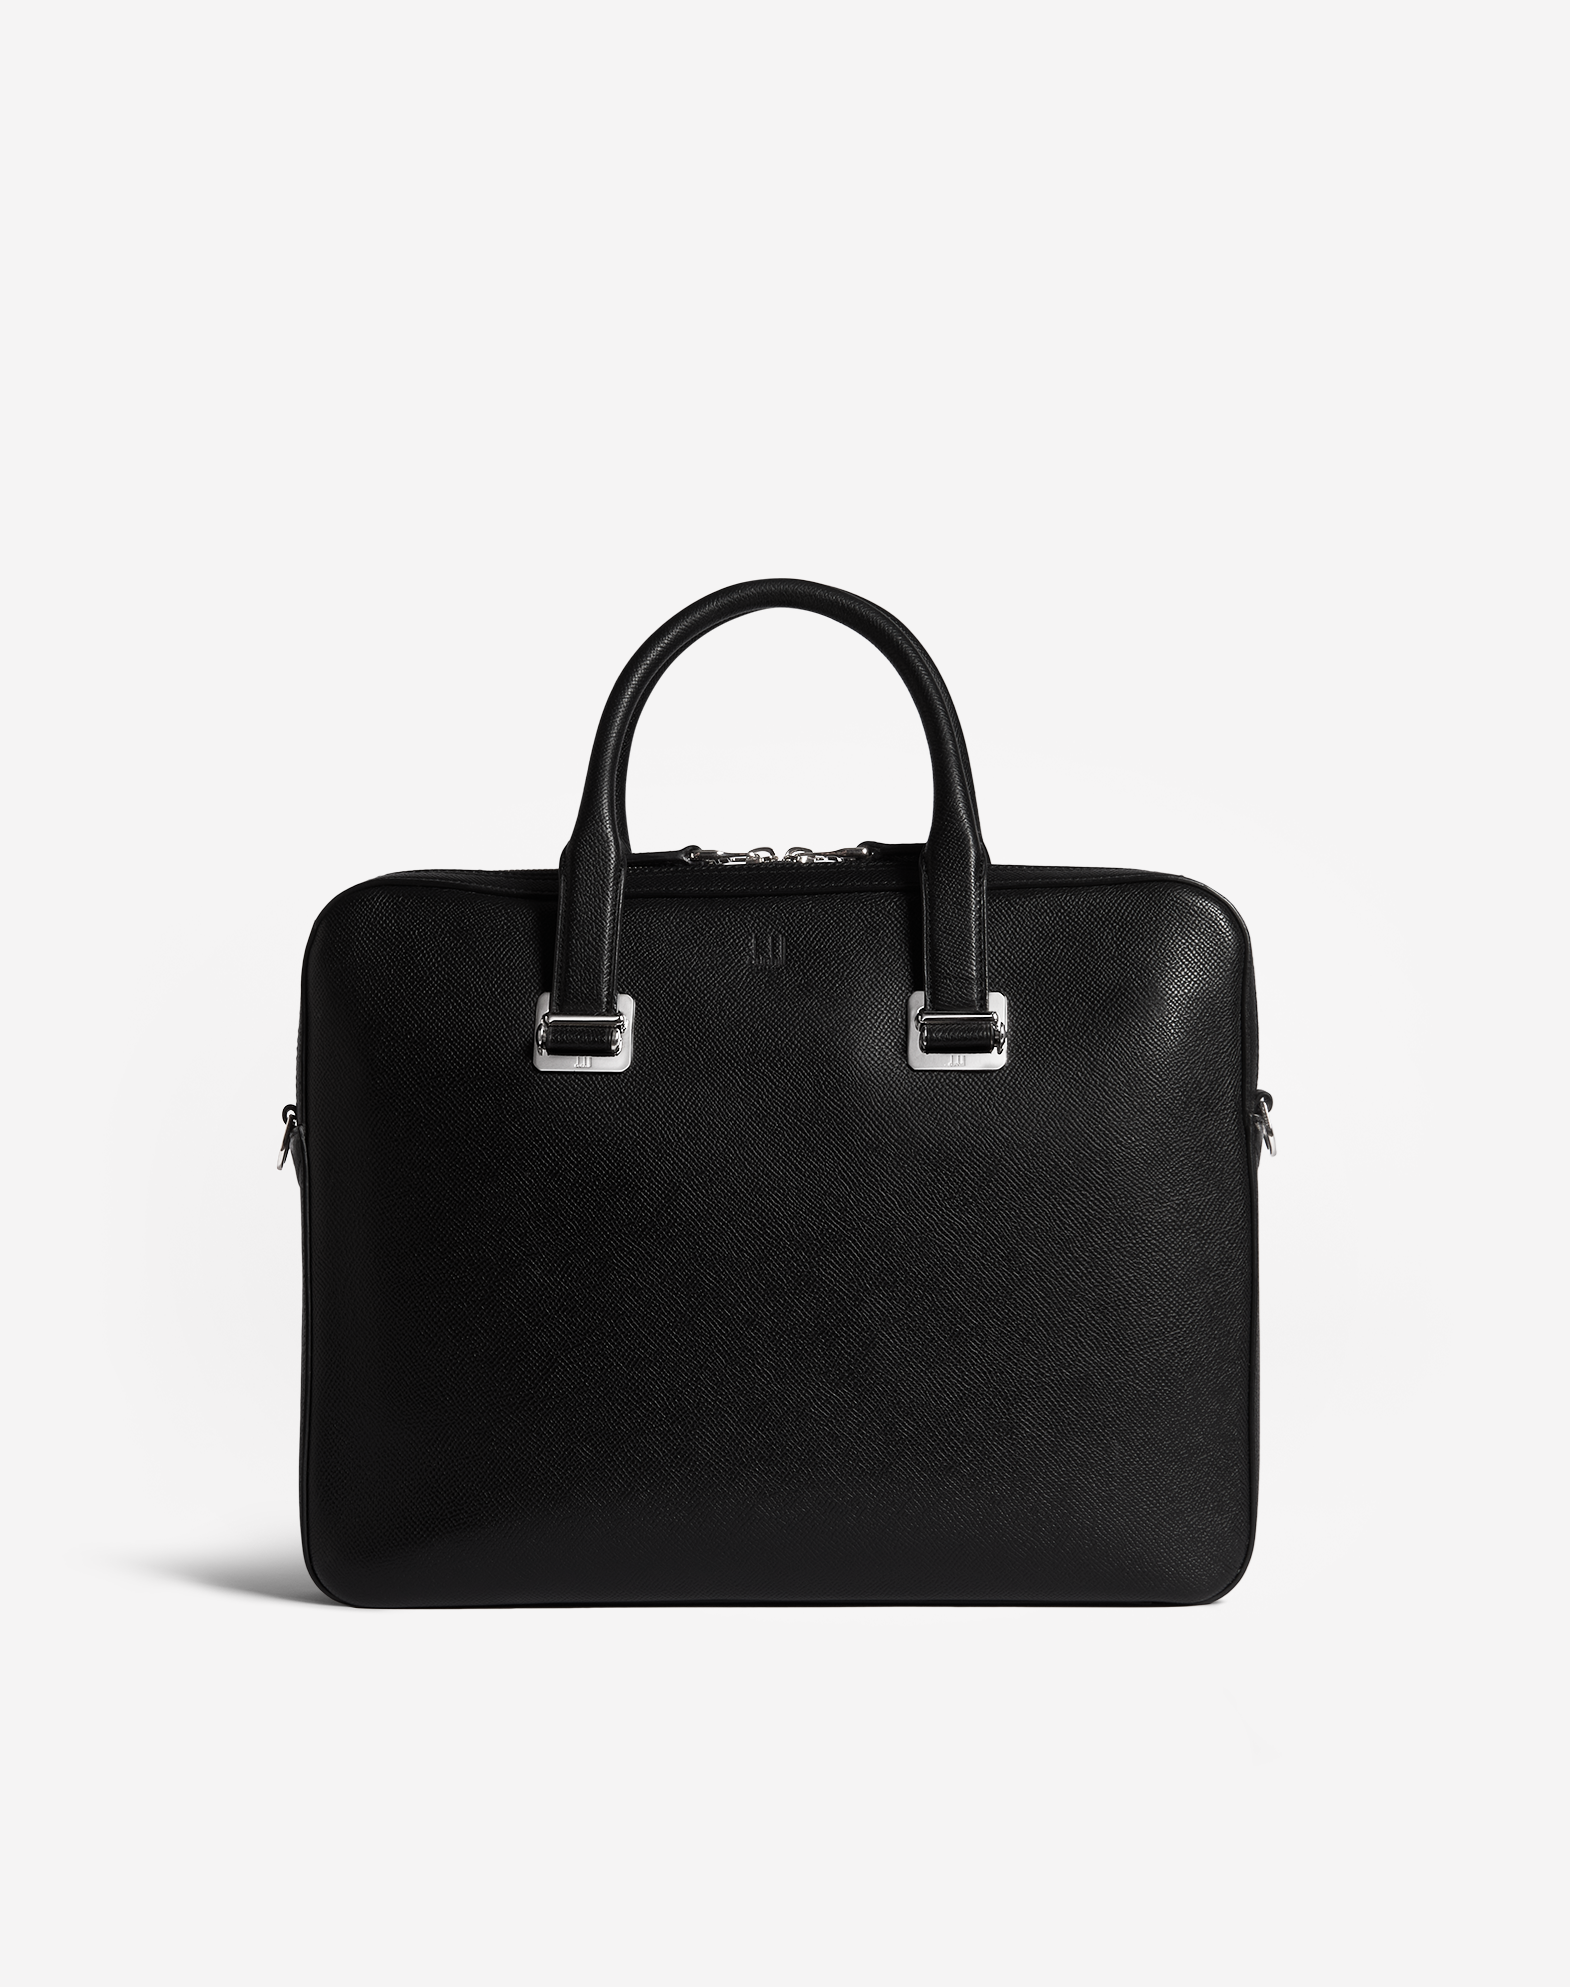 Dunhill Luxury Men's Briefcases